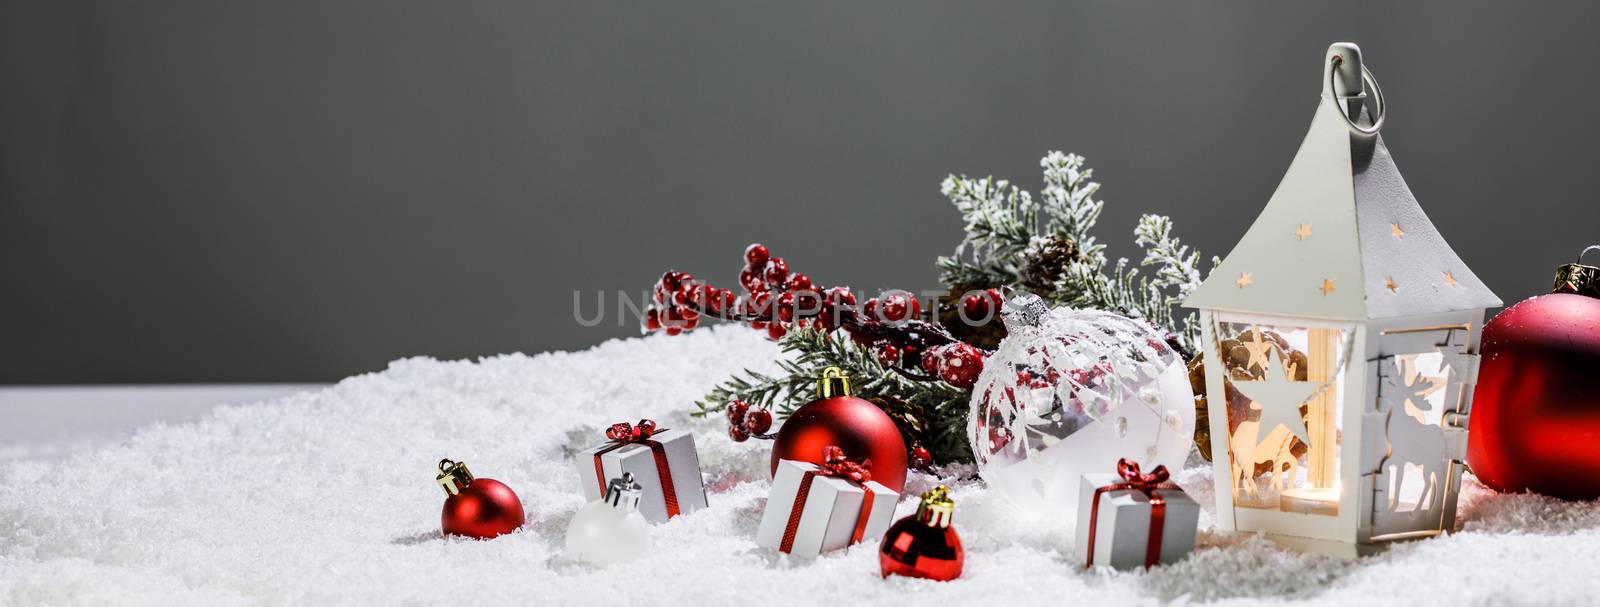 Christmas composition on snow by Yellowj